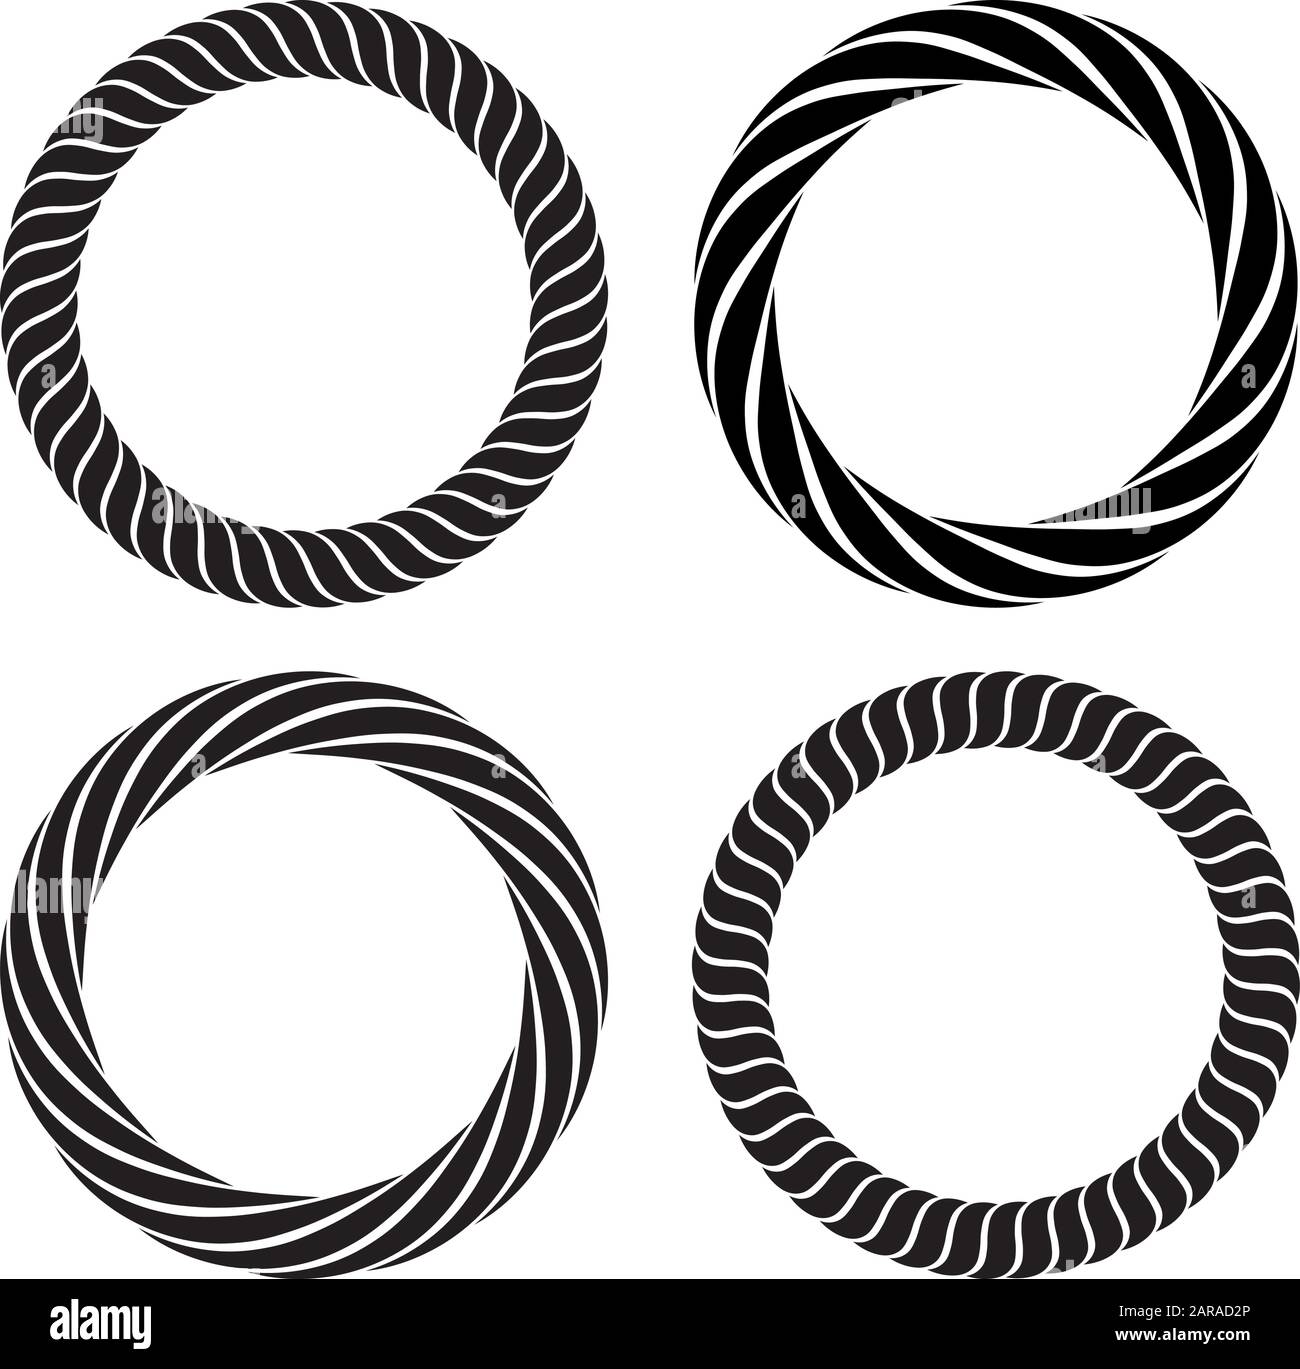 Set of four round marine rope frames isolated on the white background for decoration in marine style. Stock Vector